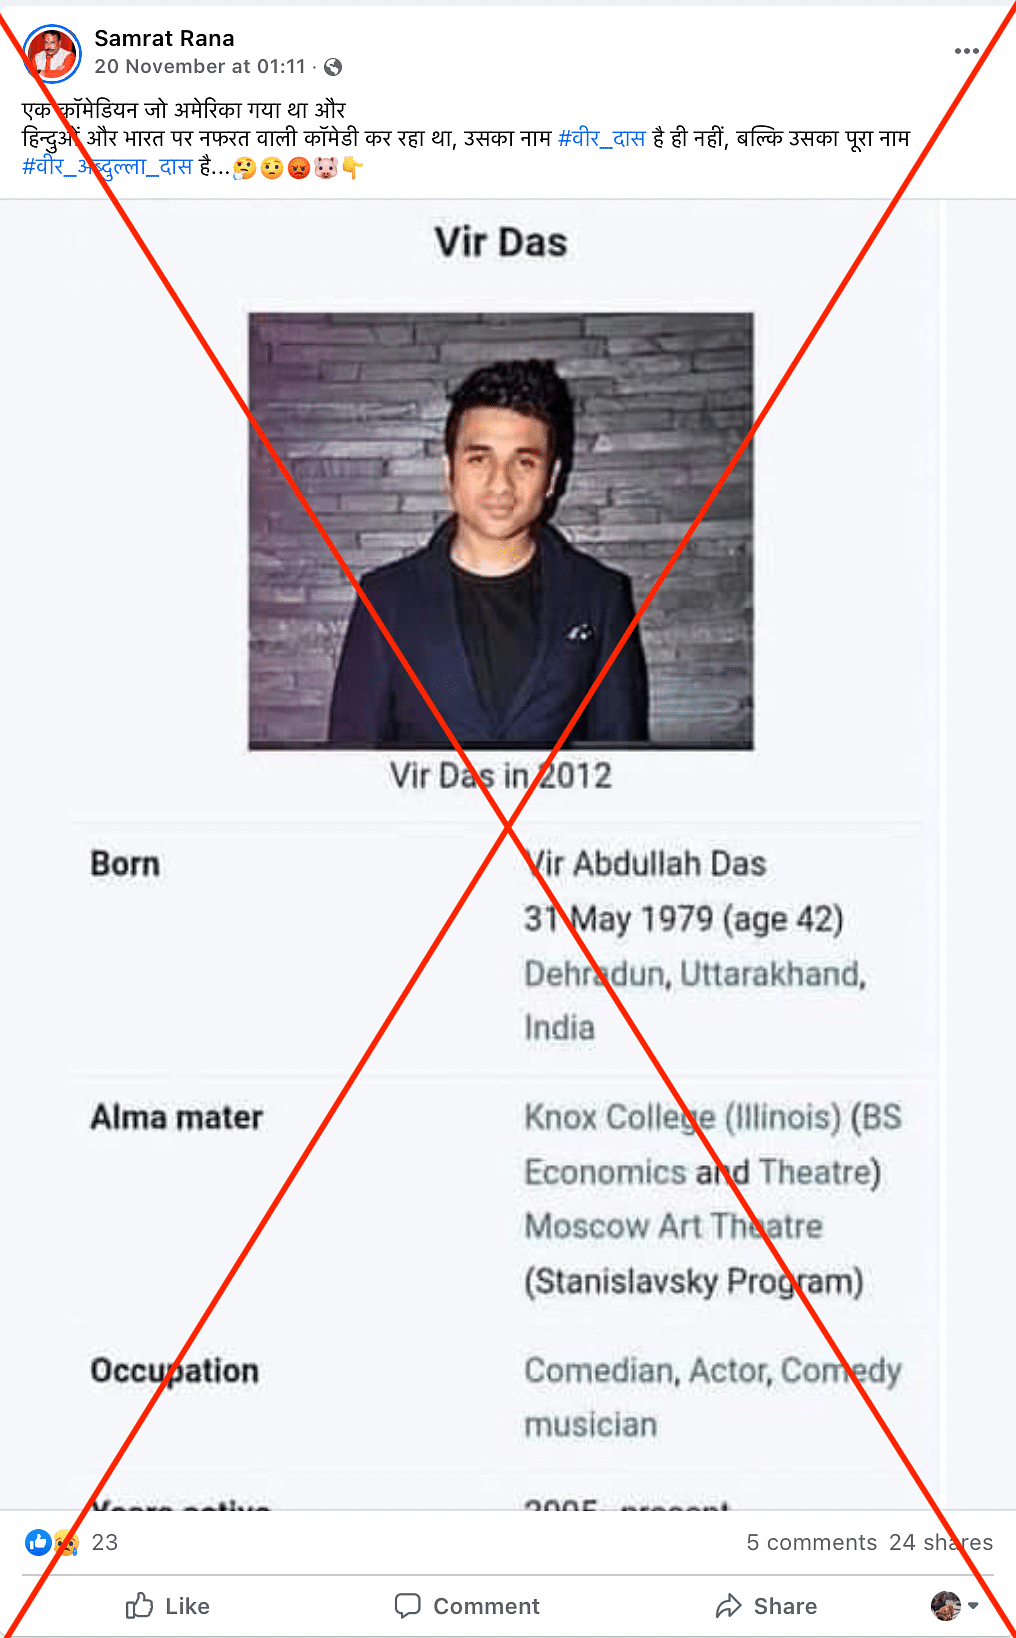 We found that the comedian's Wikipedia page was edited to add a middle name and change his nationality.